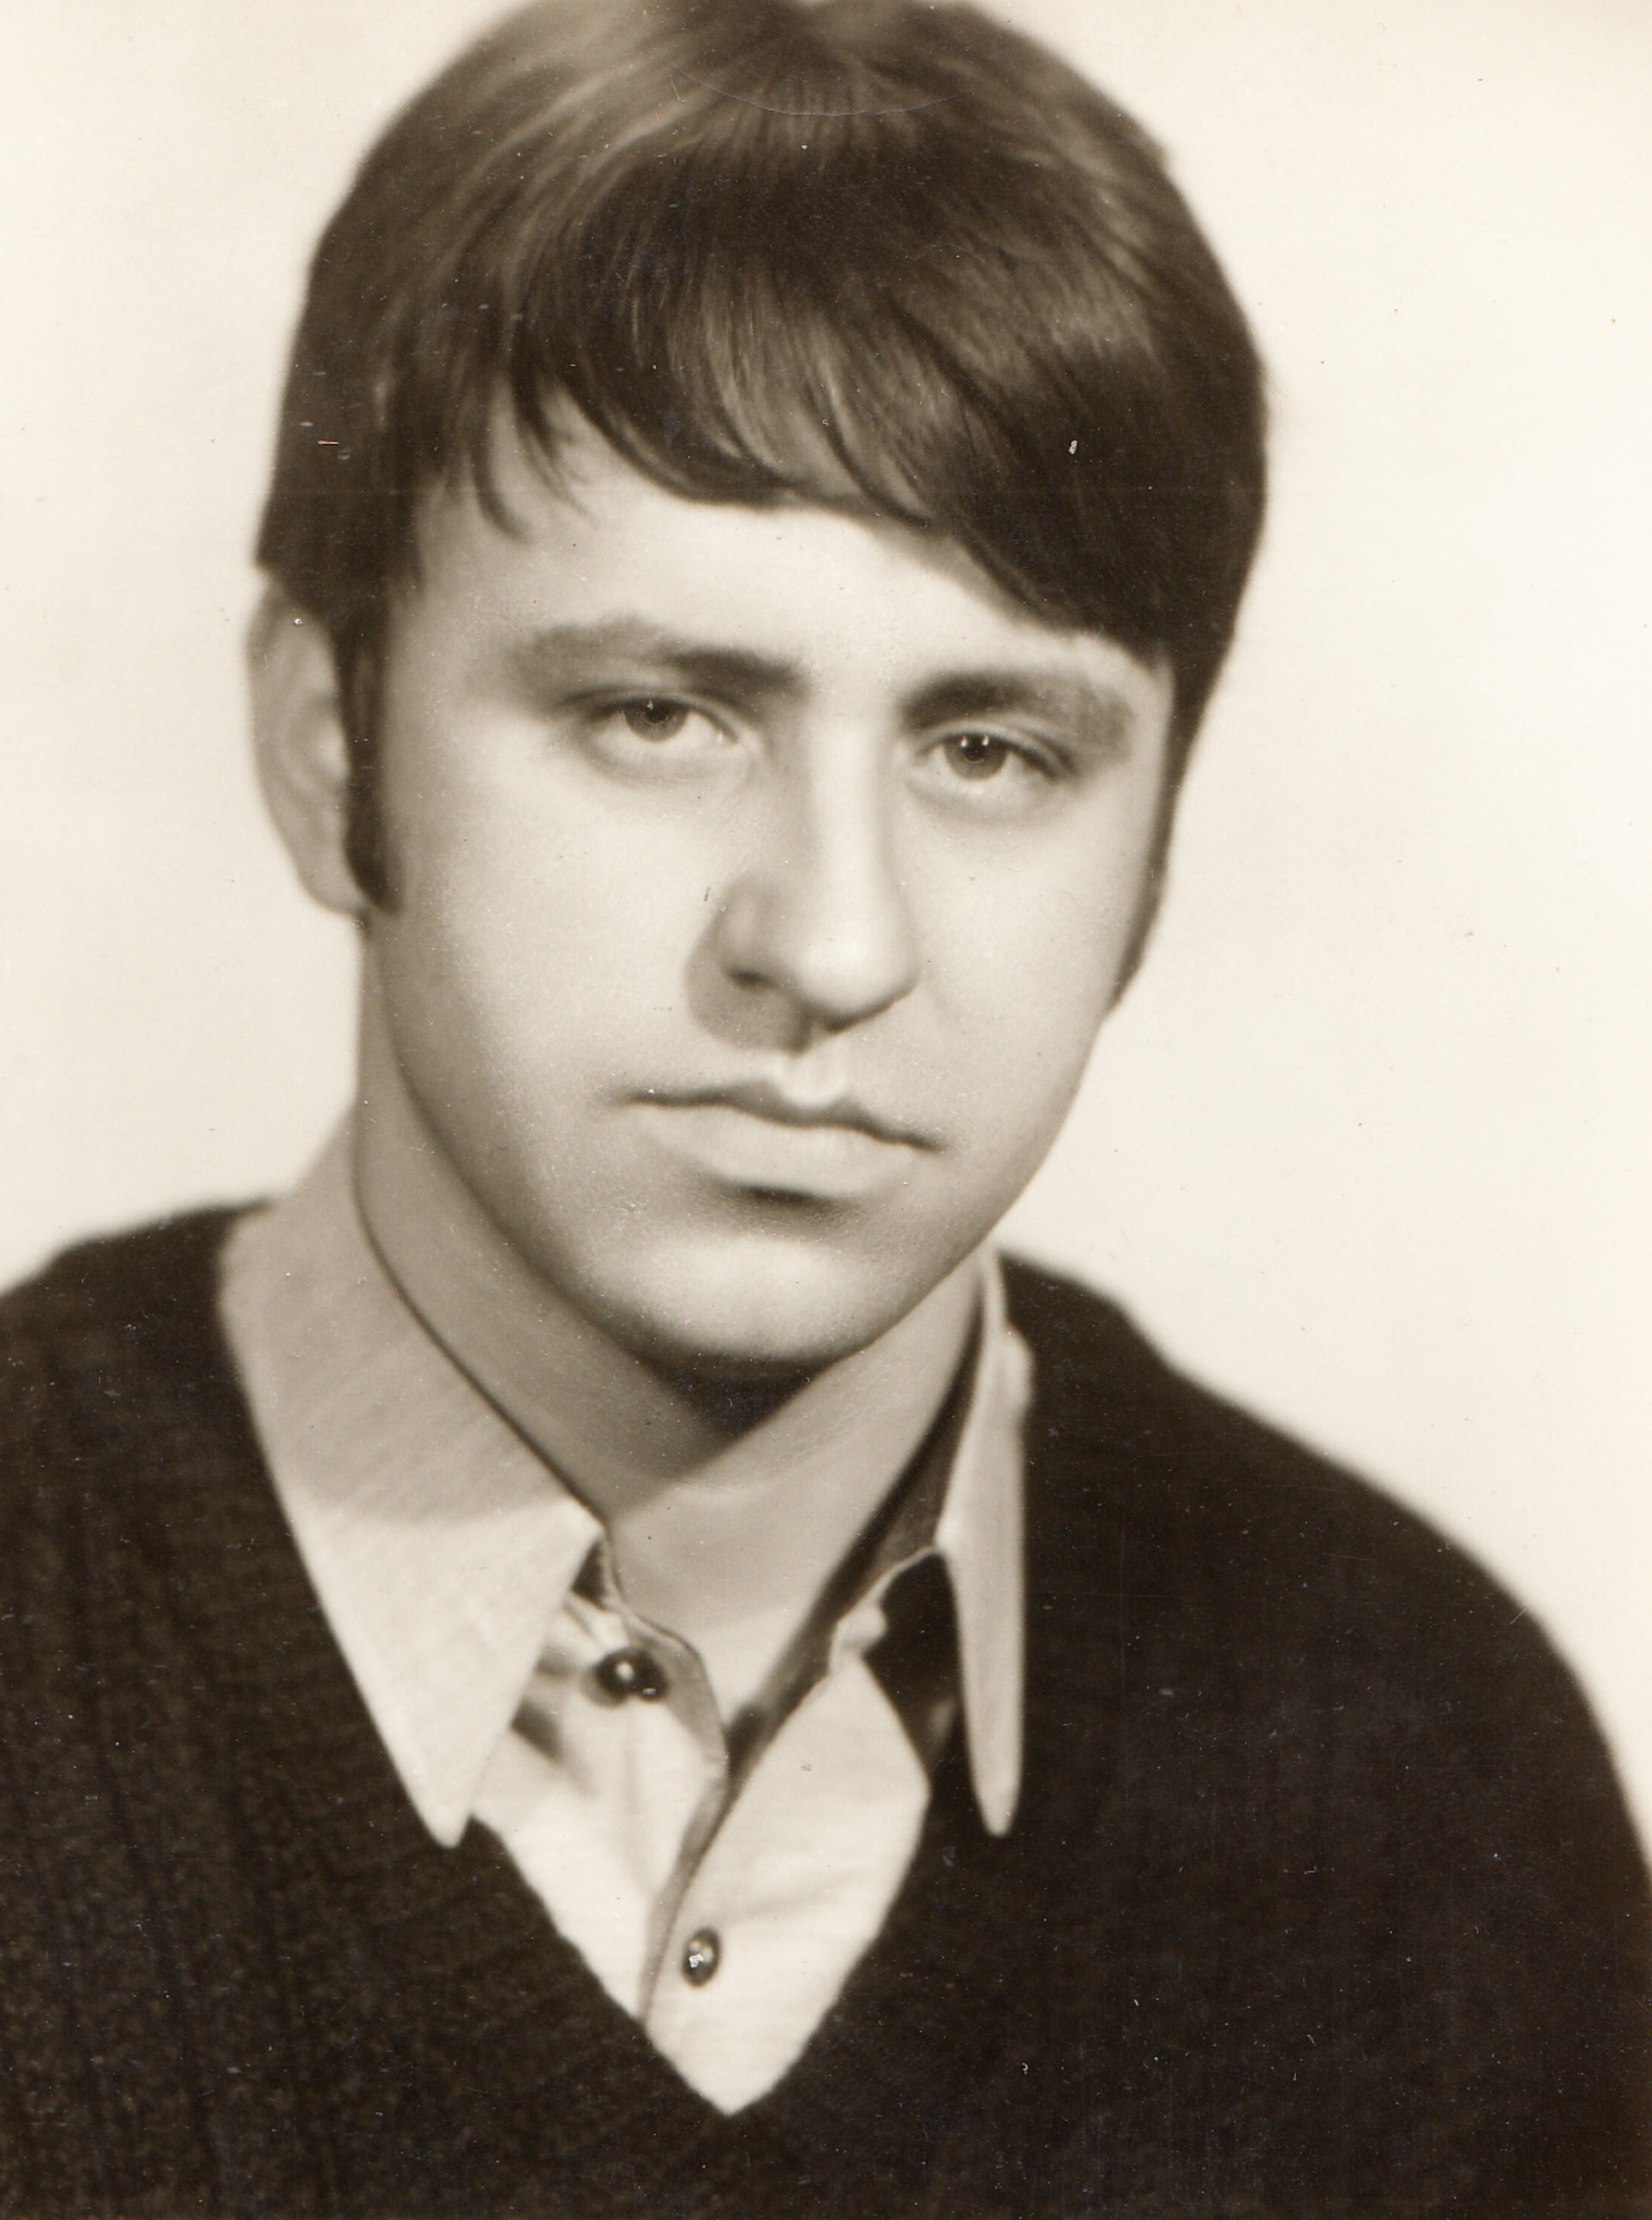 Jindřich Dohnal cca 1968, photo from the graduation class poster